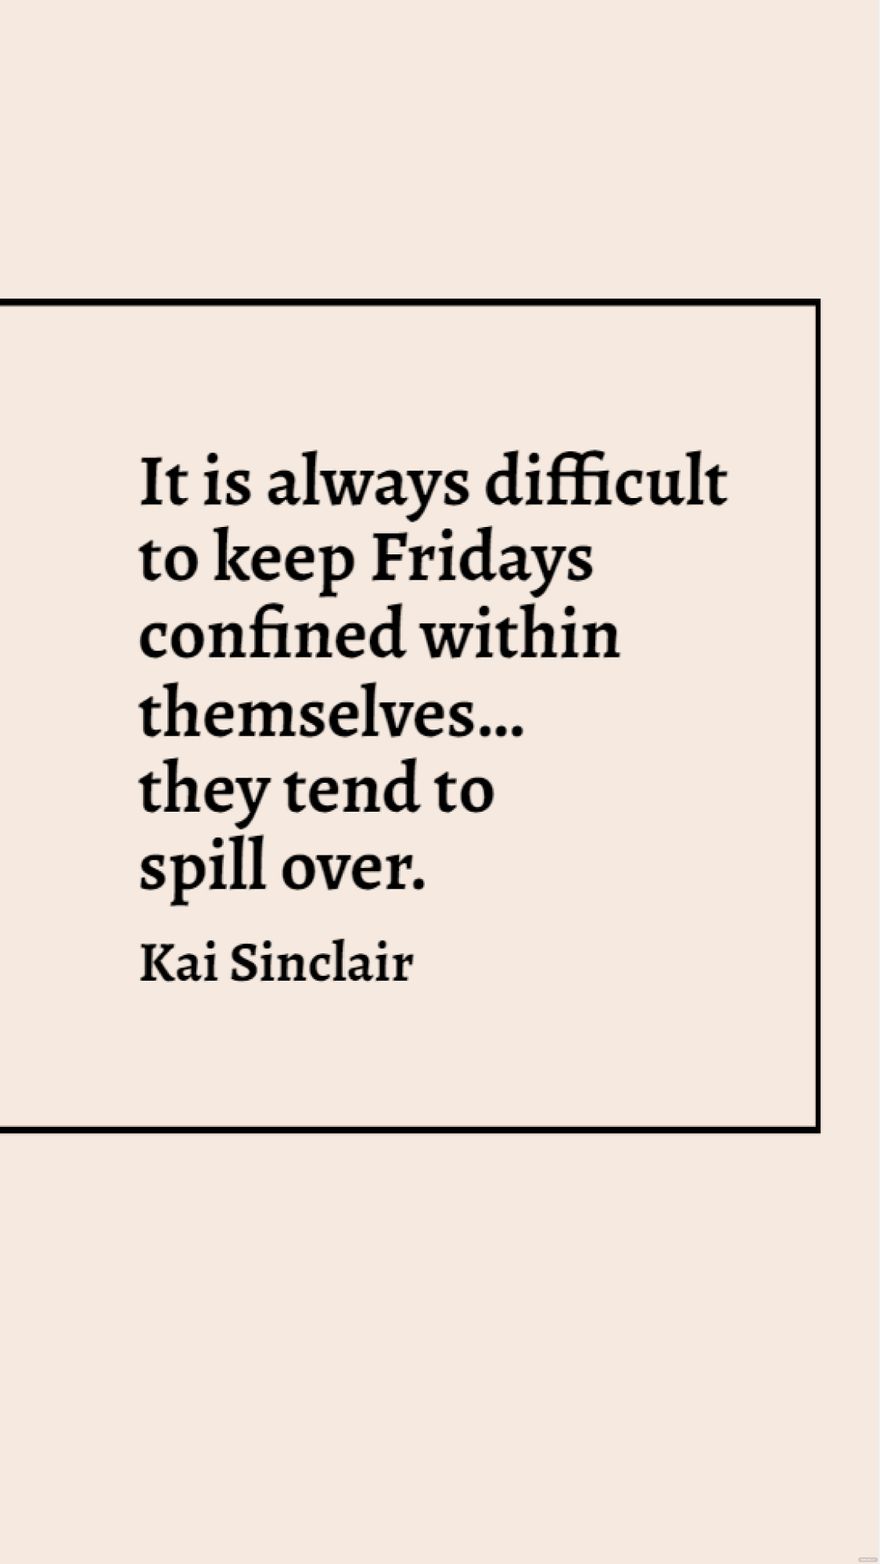 Kai Sinclair - It is always difficult to keep Fridays confined within themselves…they tend to spill over.